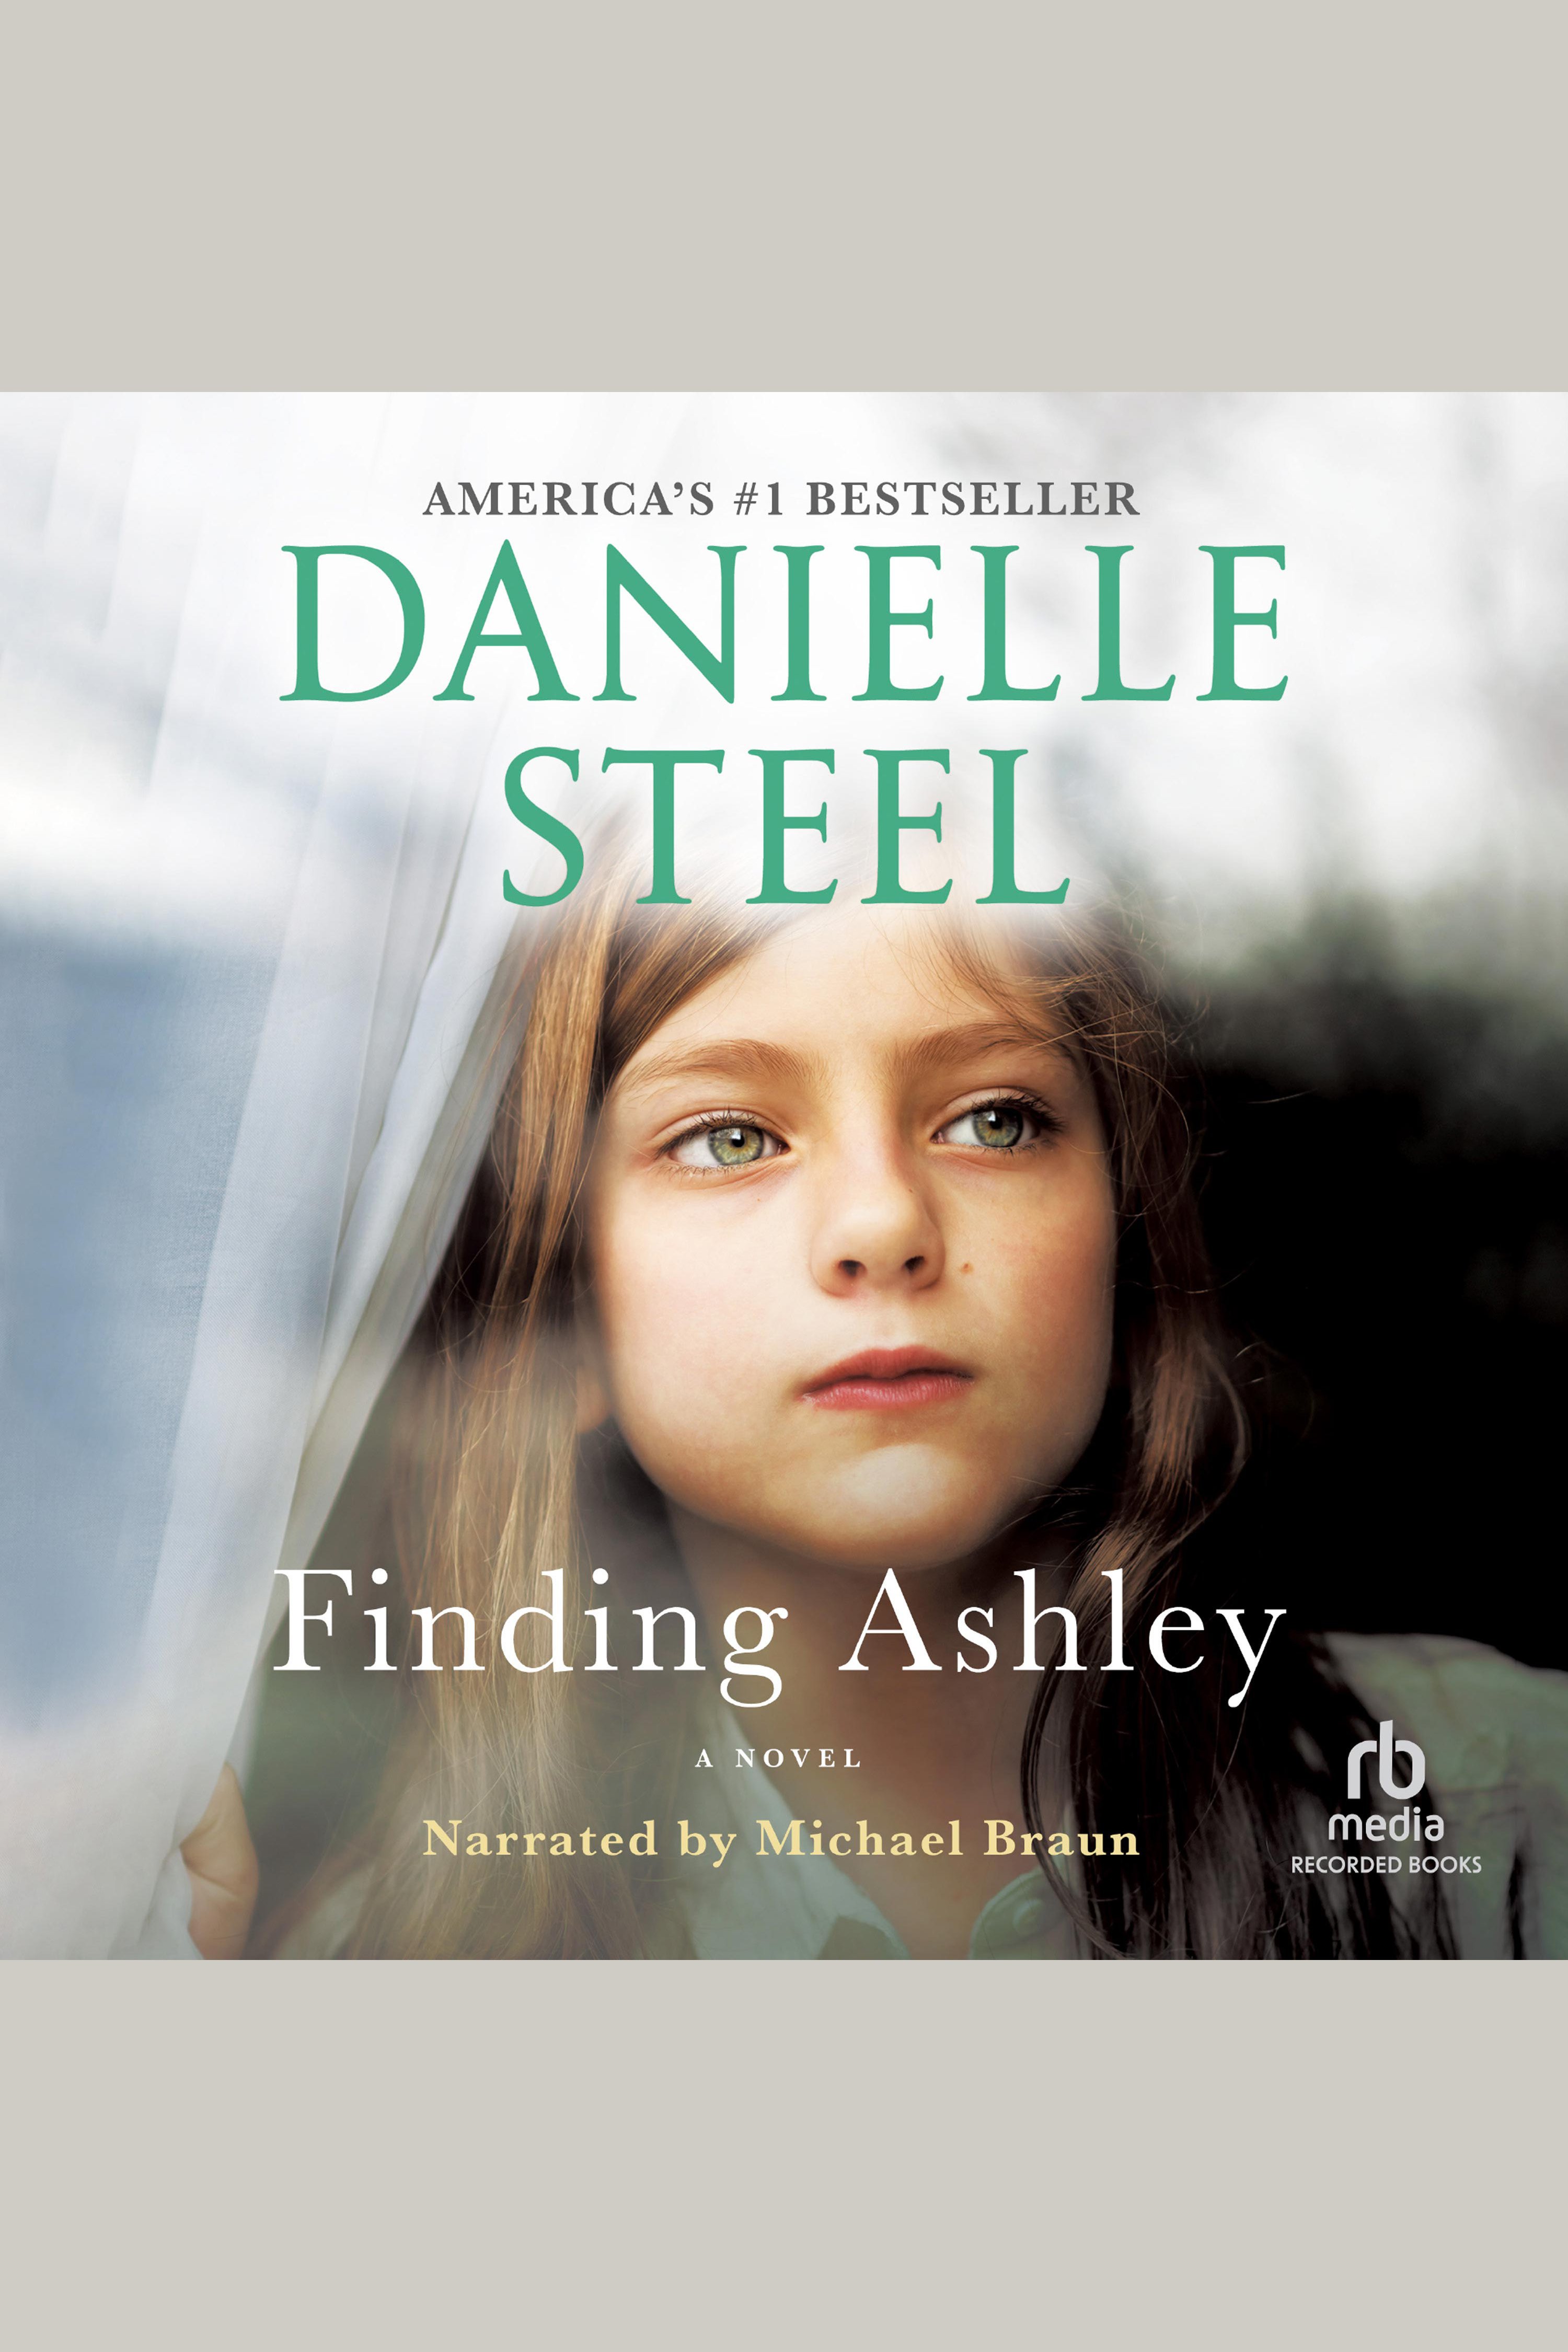 Finding Ashley cover image